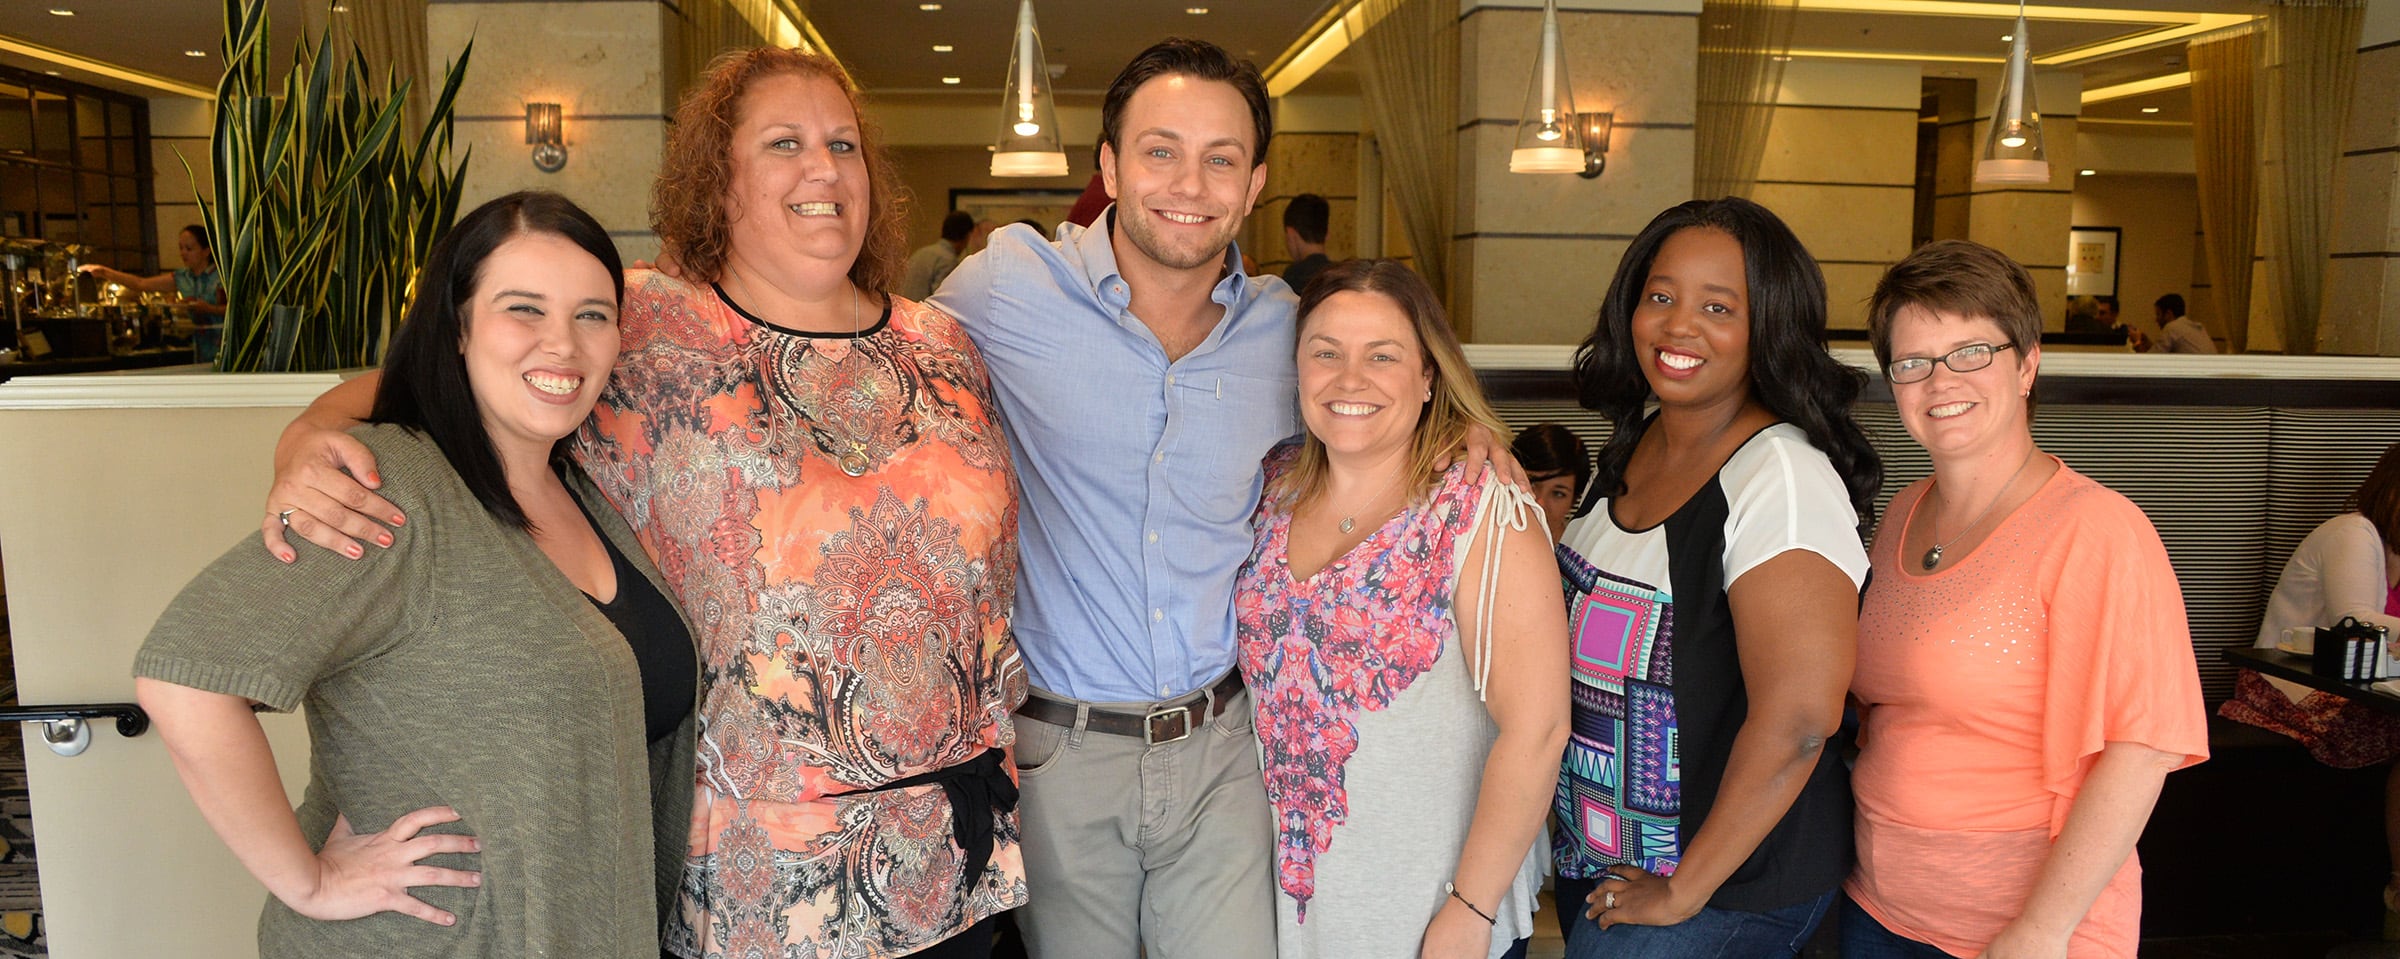 Exclusive Interview with Jonathan Sadowski of Young and Hungry #ABCFamilyEvent #YoungandHungry